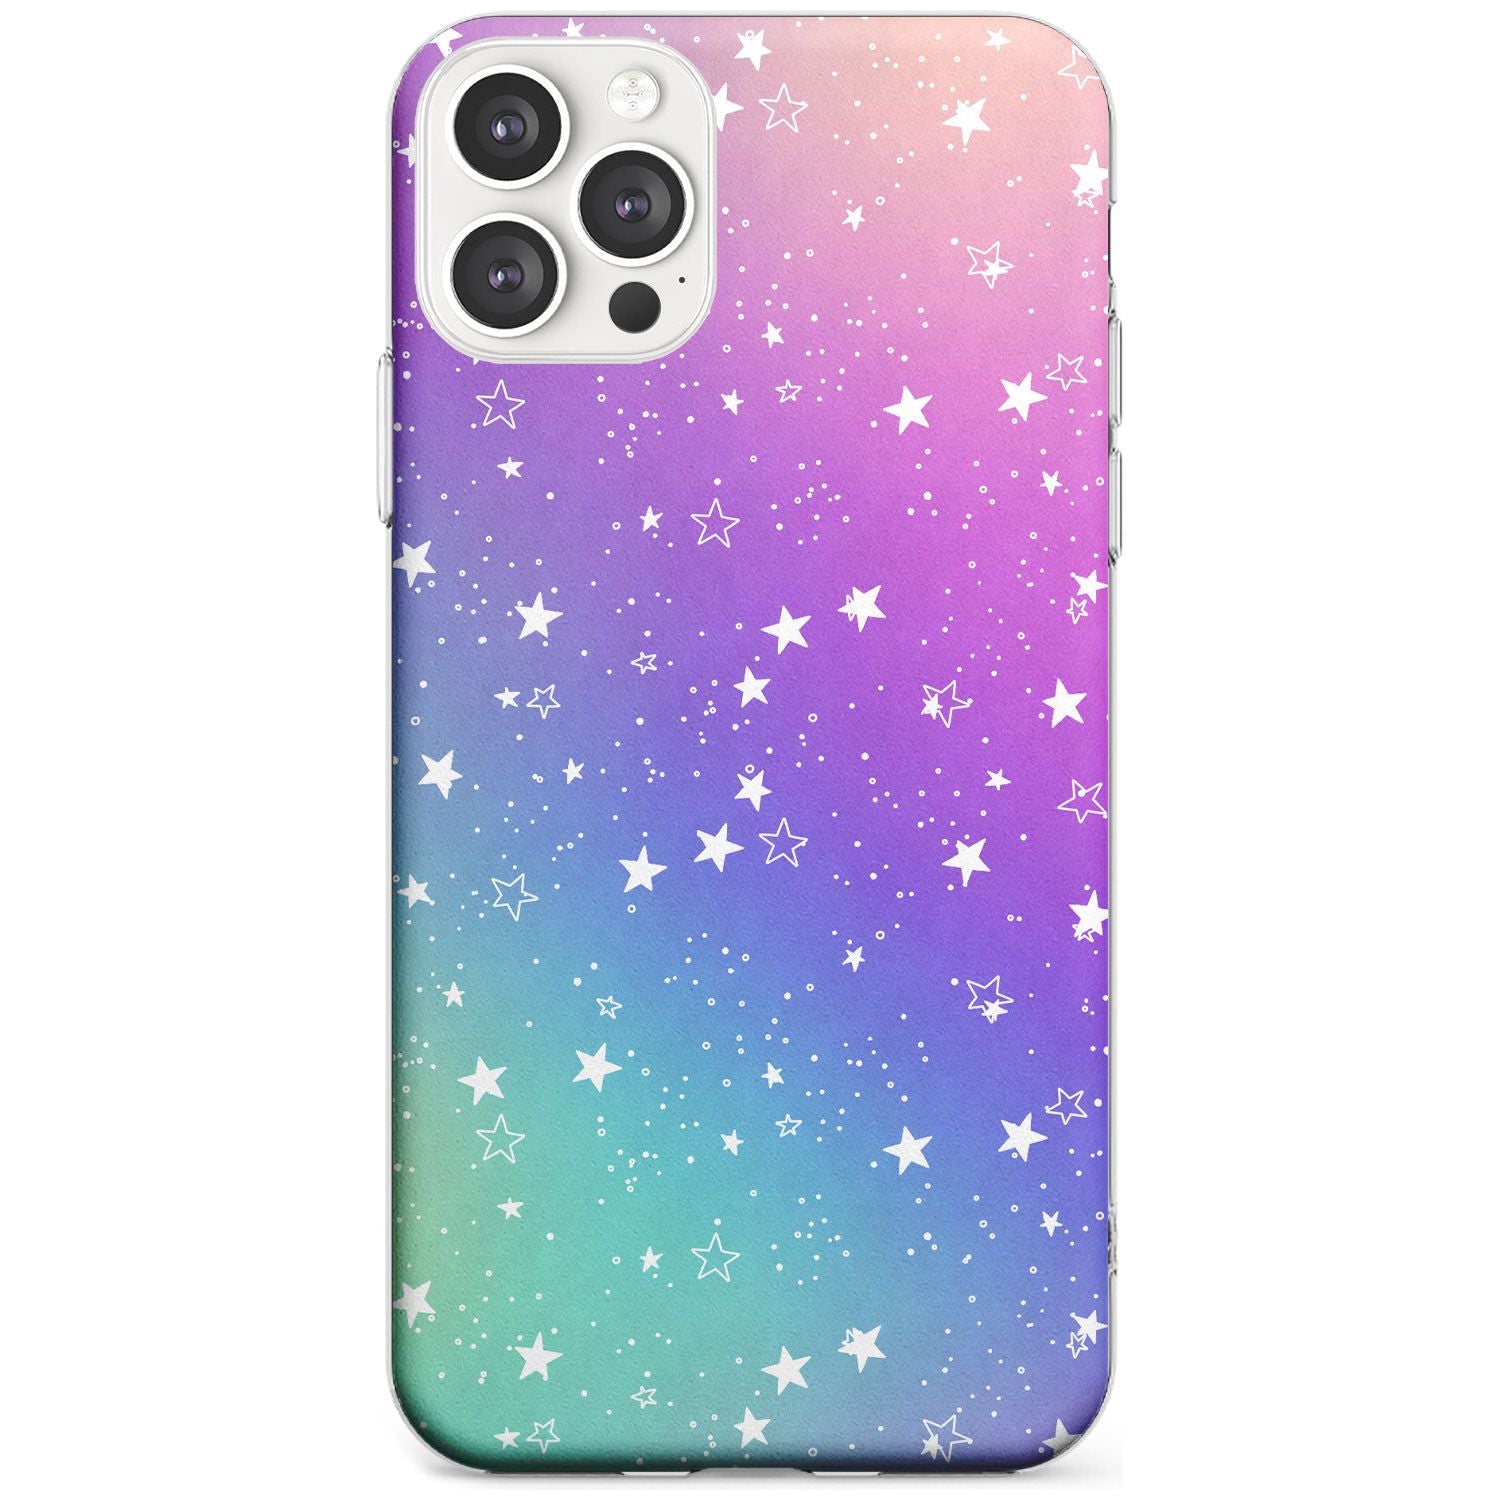 White Stars on Pastels Black Impact Phone Case for iPhone 11 Pro Max